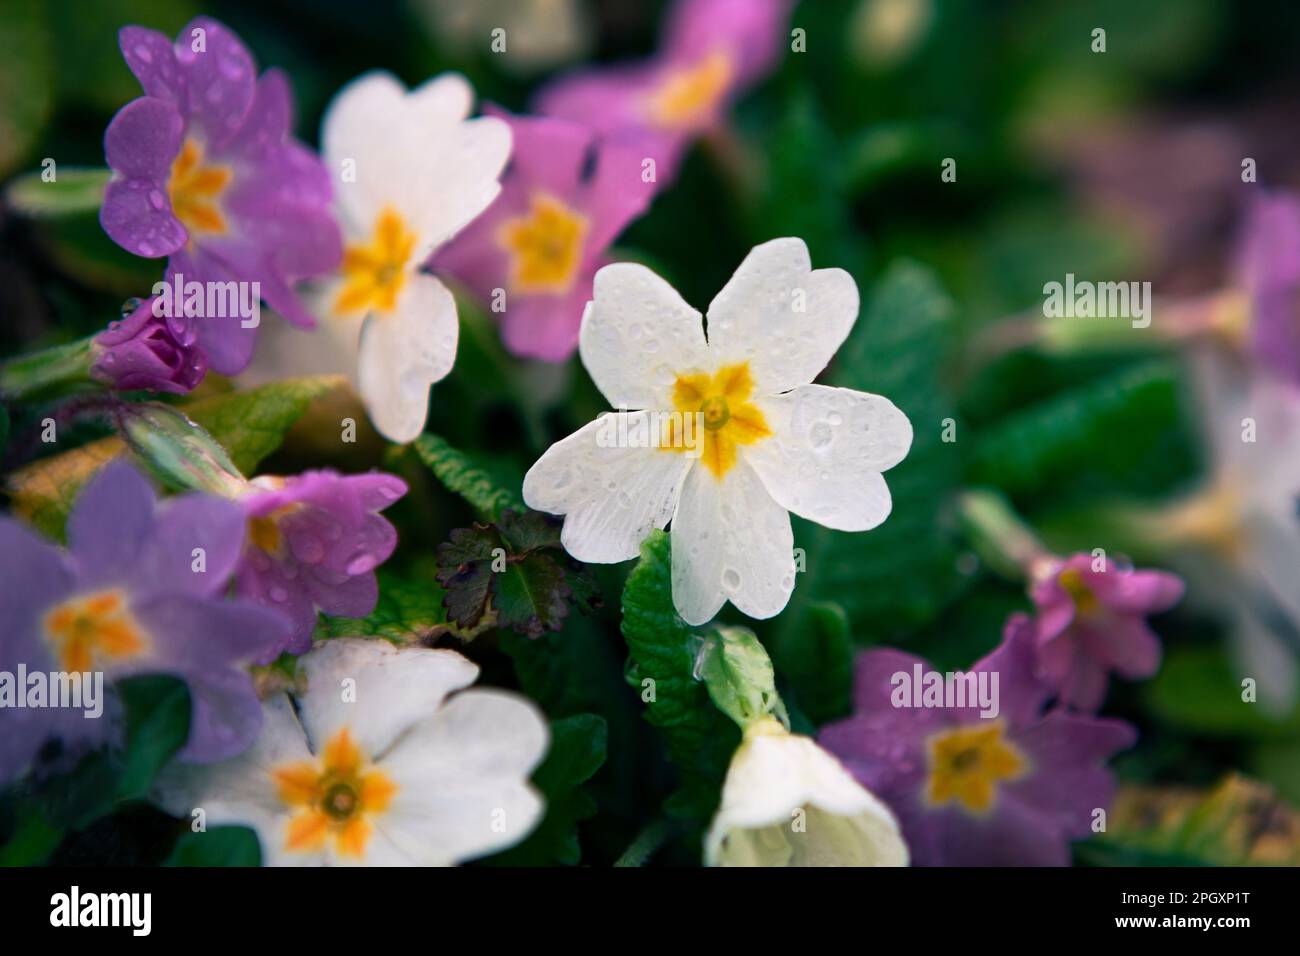 Pretty little wildflowers, Primrose after rain in the garden, close-up. Macro springtime flowers. Stock Photo